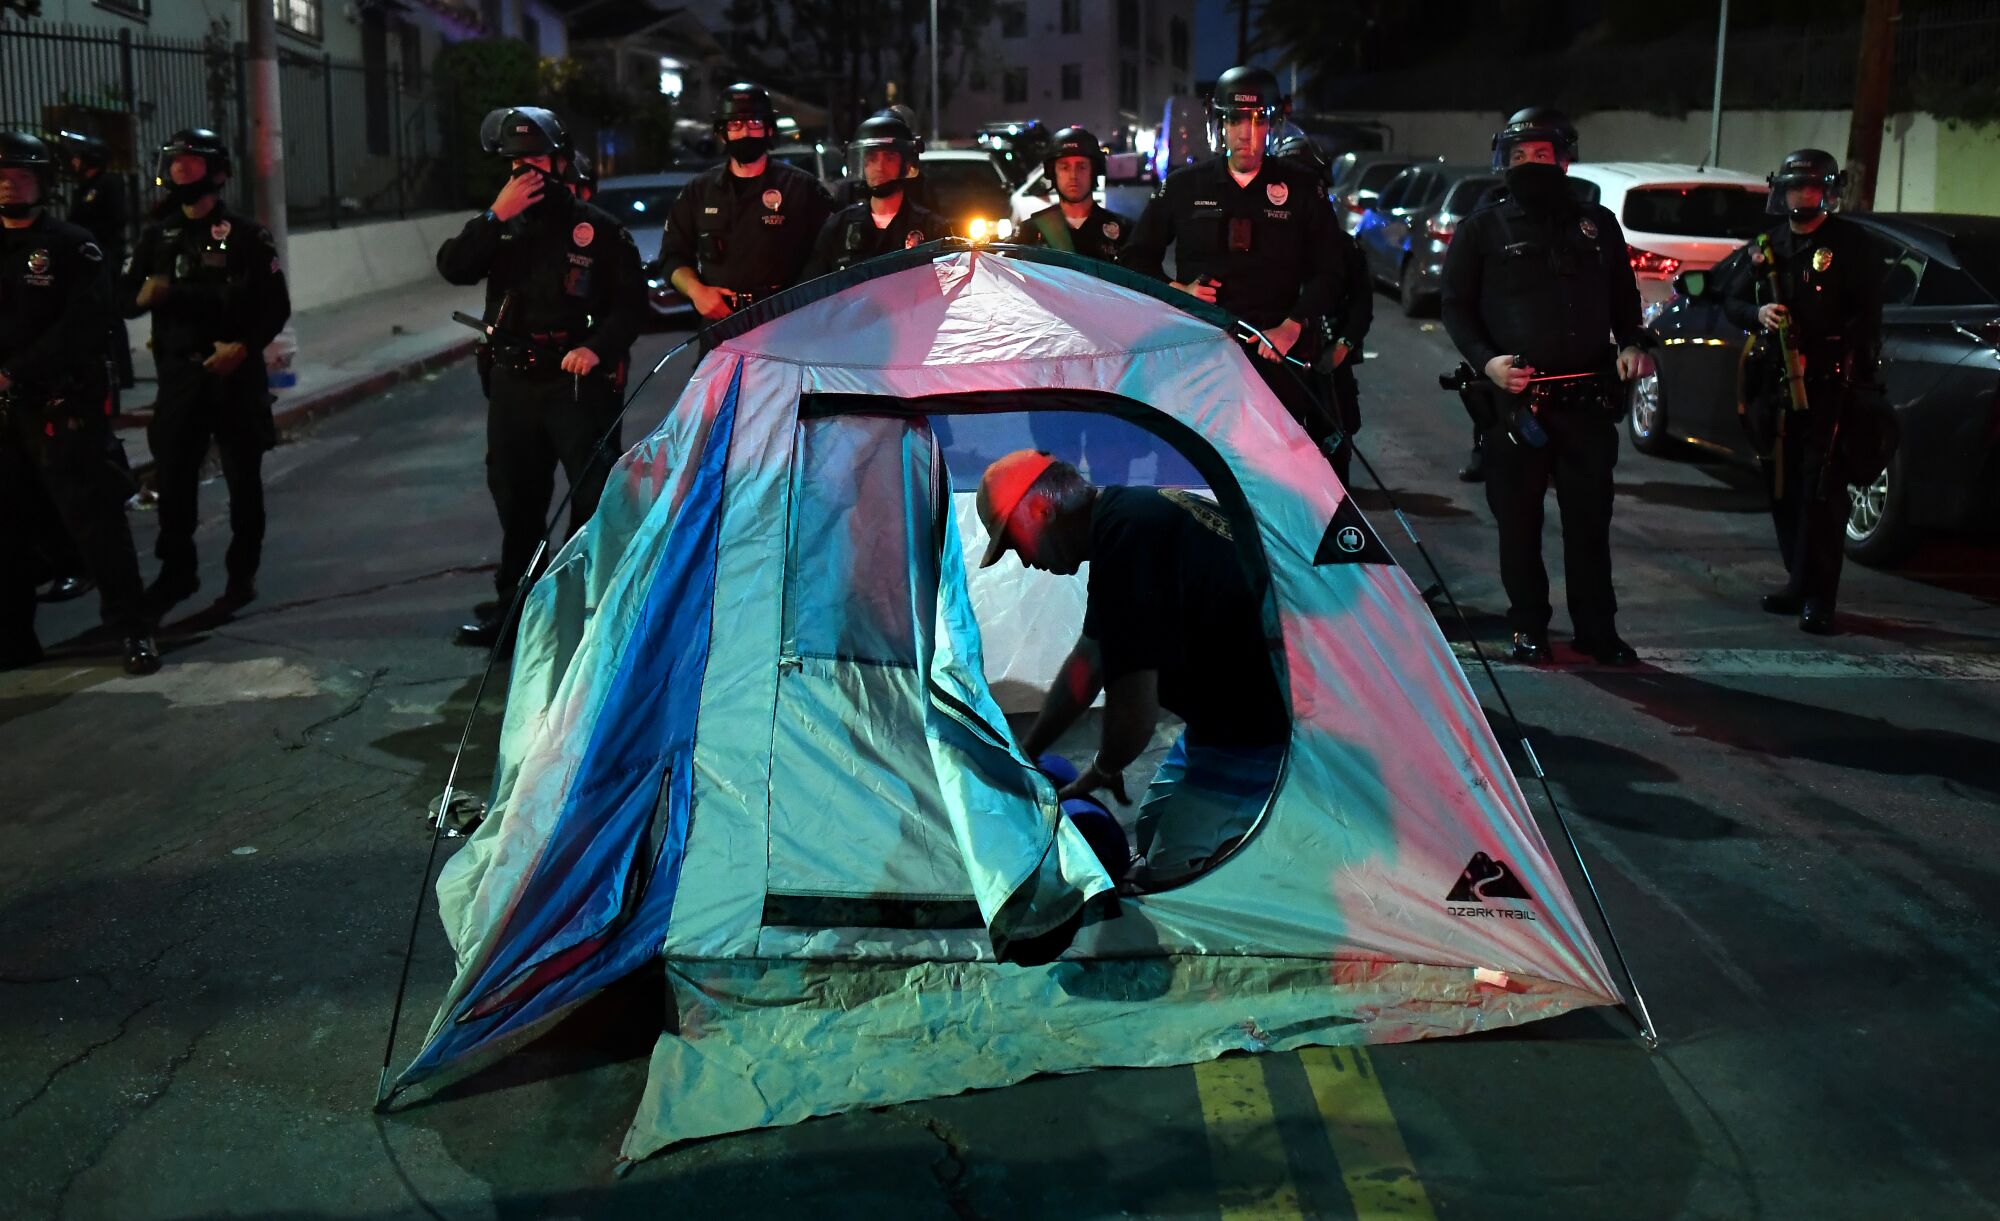 A man is inside a tent in front of a line of police in riot gear.